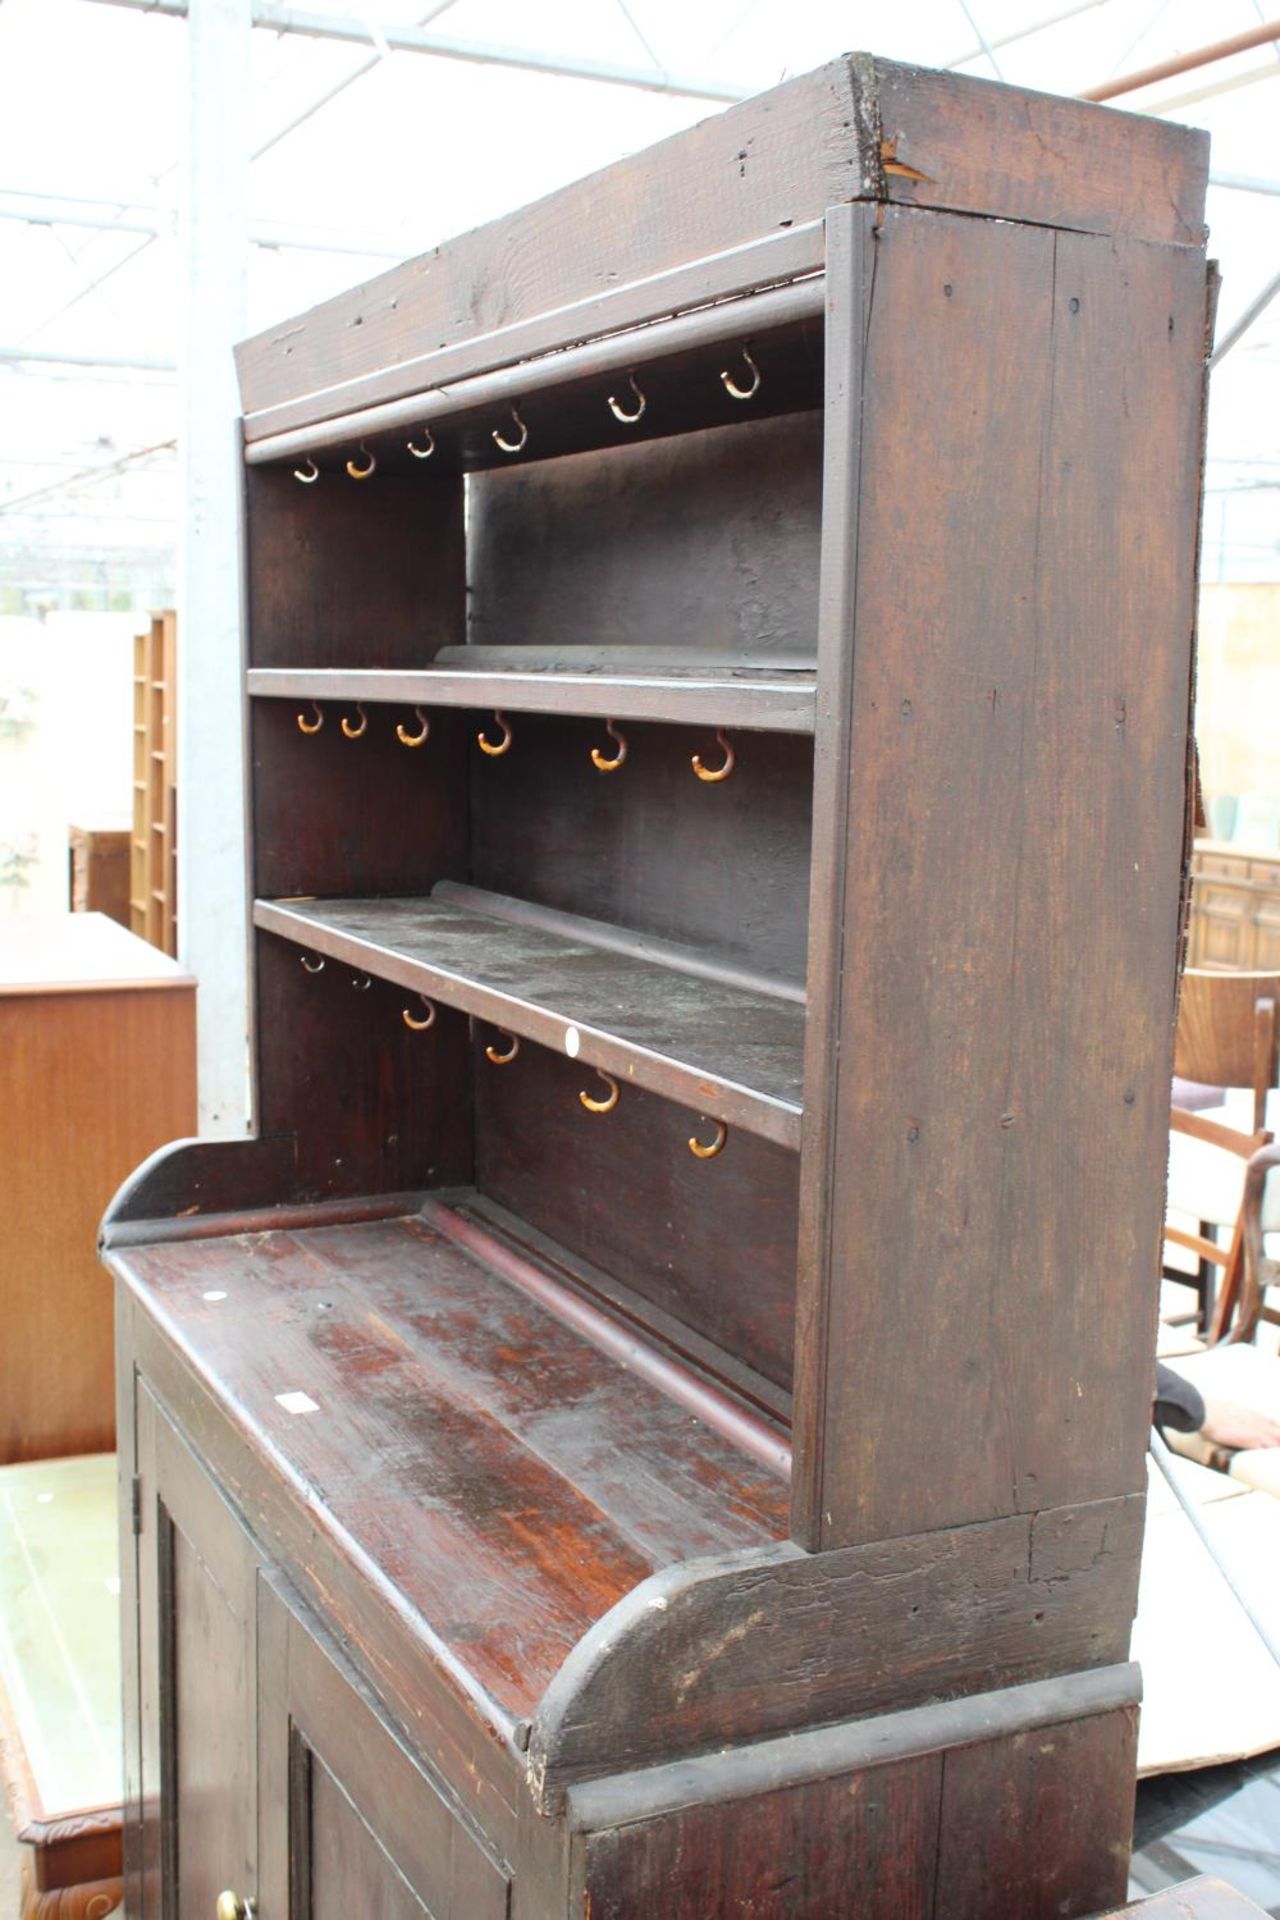 A LATE VICTORIAN PINE KITCHEN DRESSER WITH 2 CUPBOARDS TO BASE AND PLATE RACK, 43" WIDE - Image 2 of 3